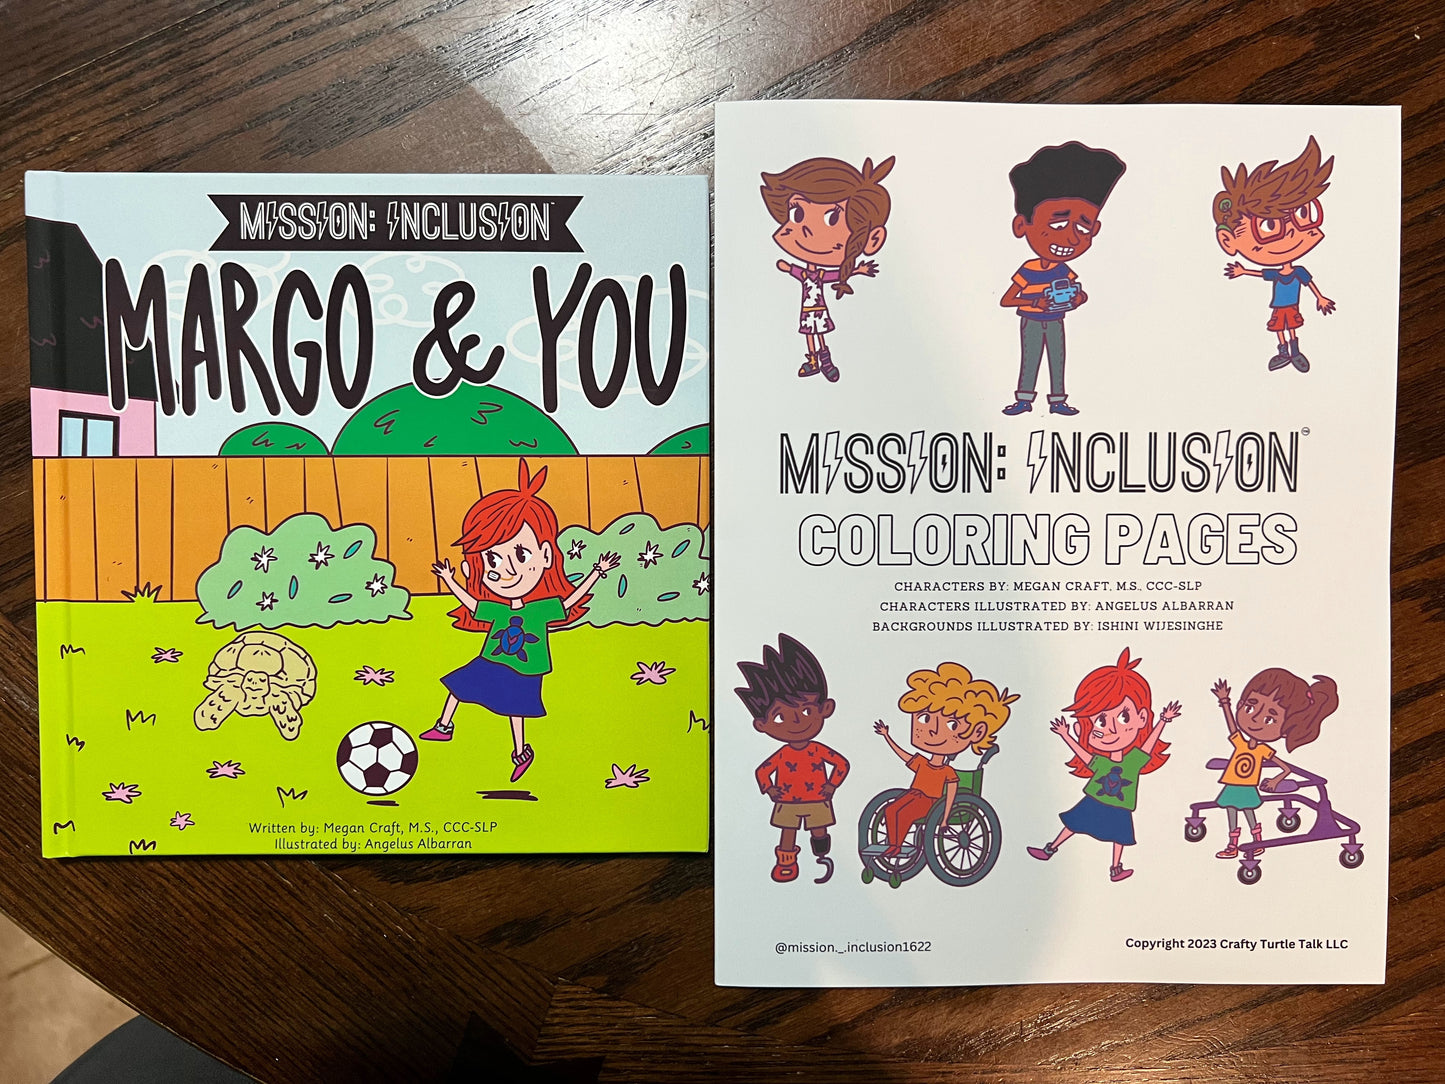 Mission: Inclusion Coloring book with Margo and you HARDCOVER